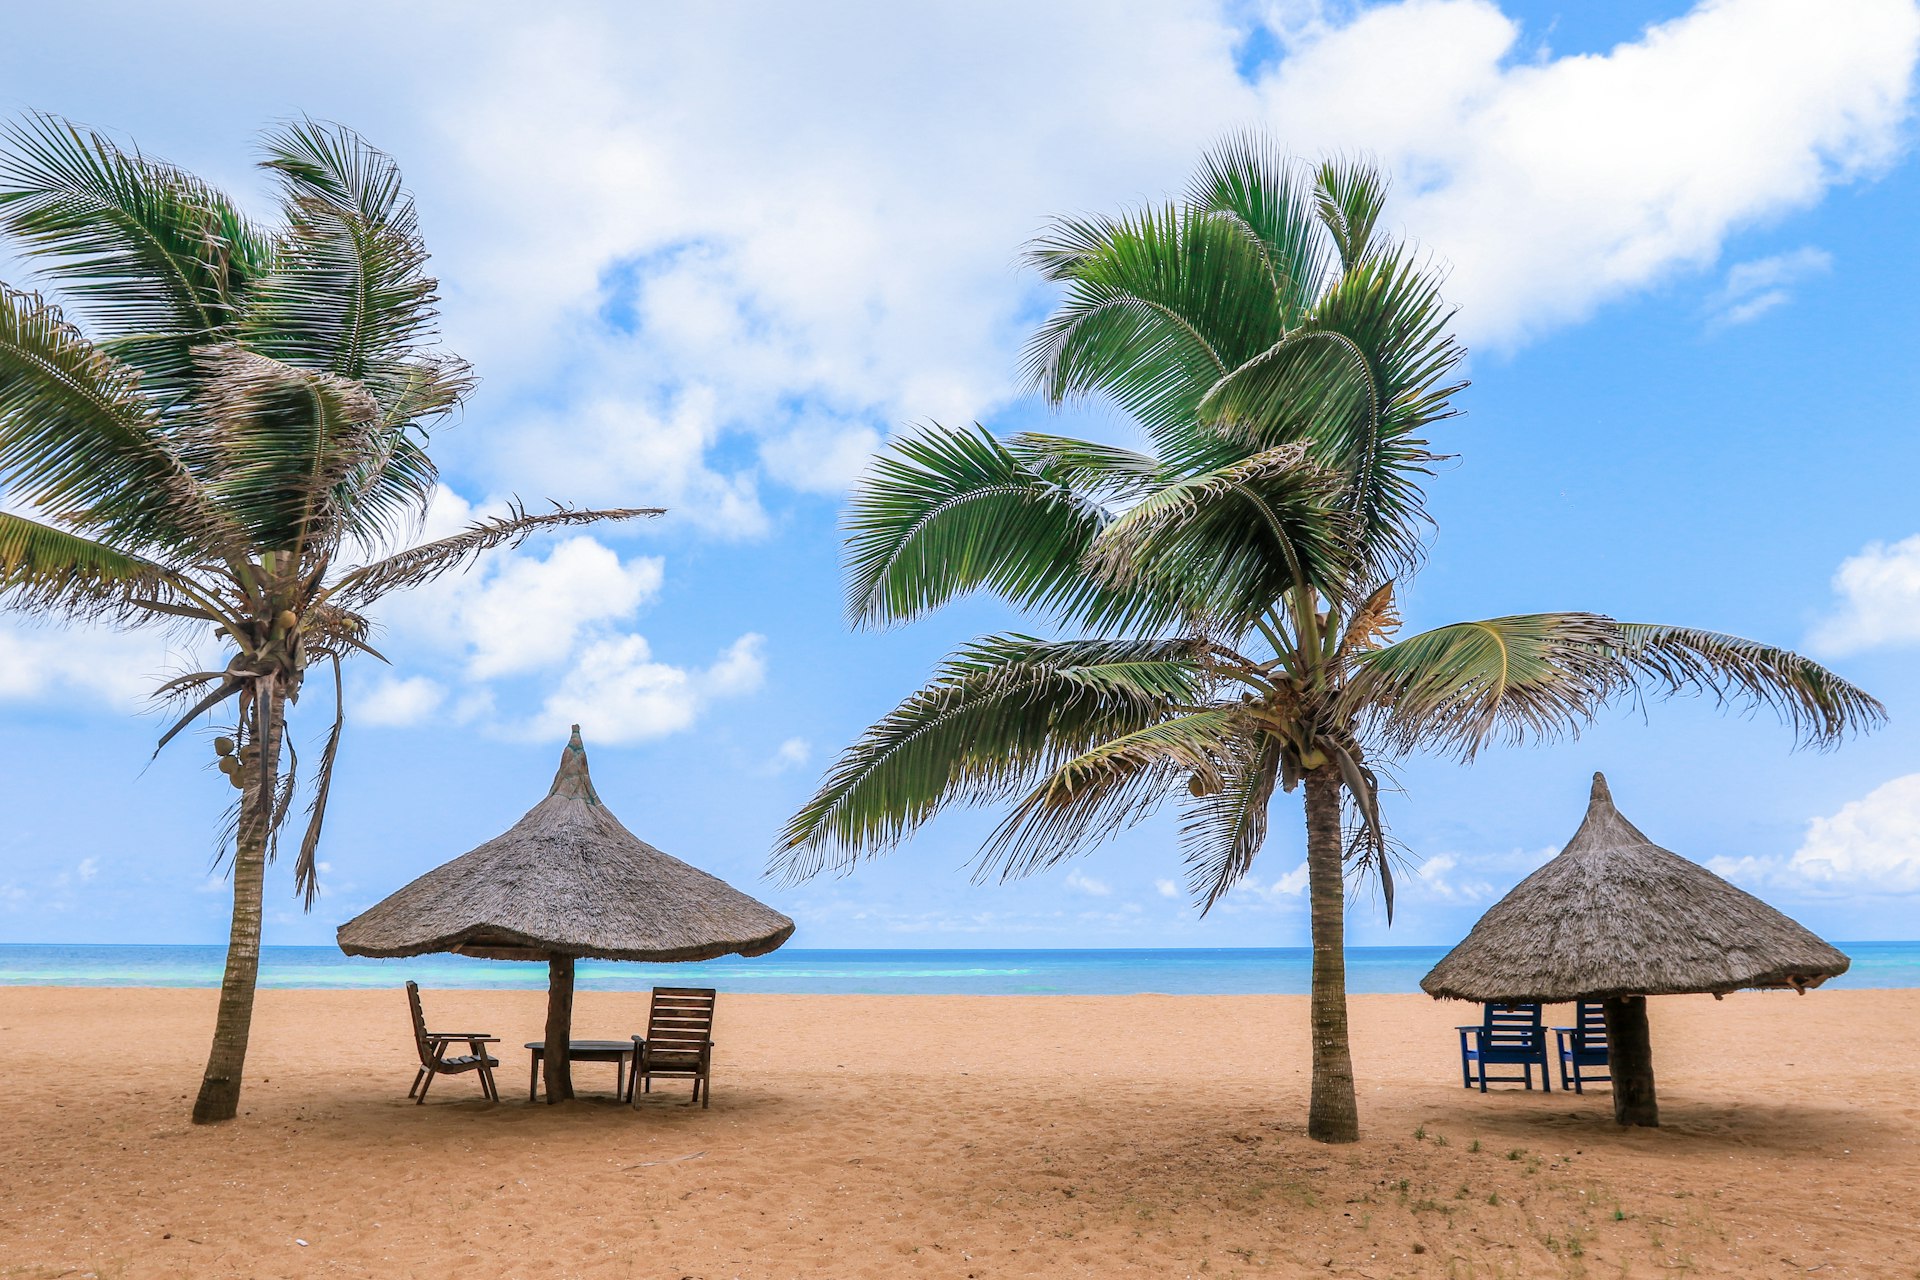 Two palm trees with parasols and chairs underneath them on the beach in Grand Popo, Benin